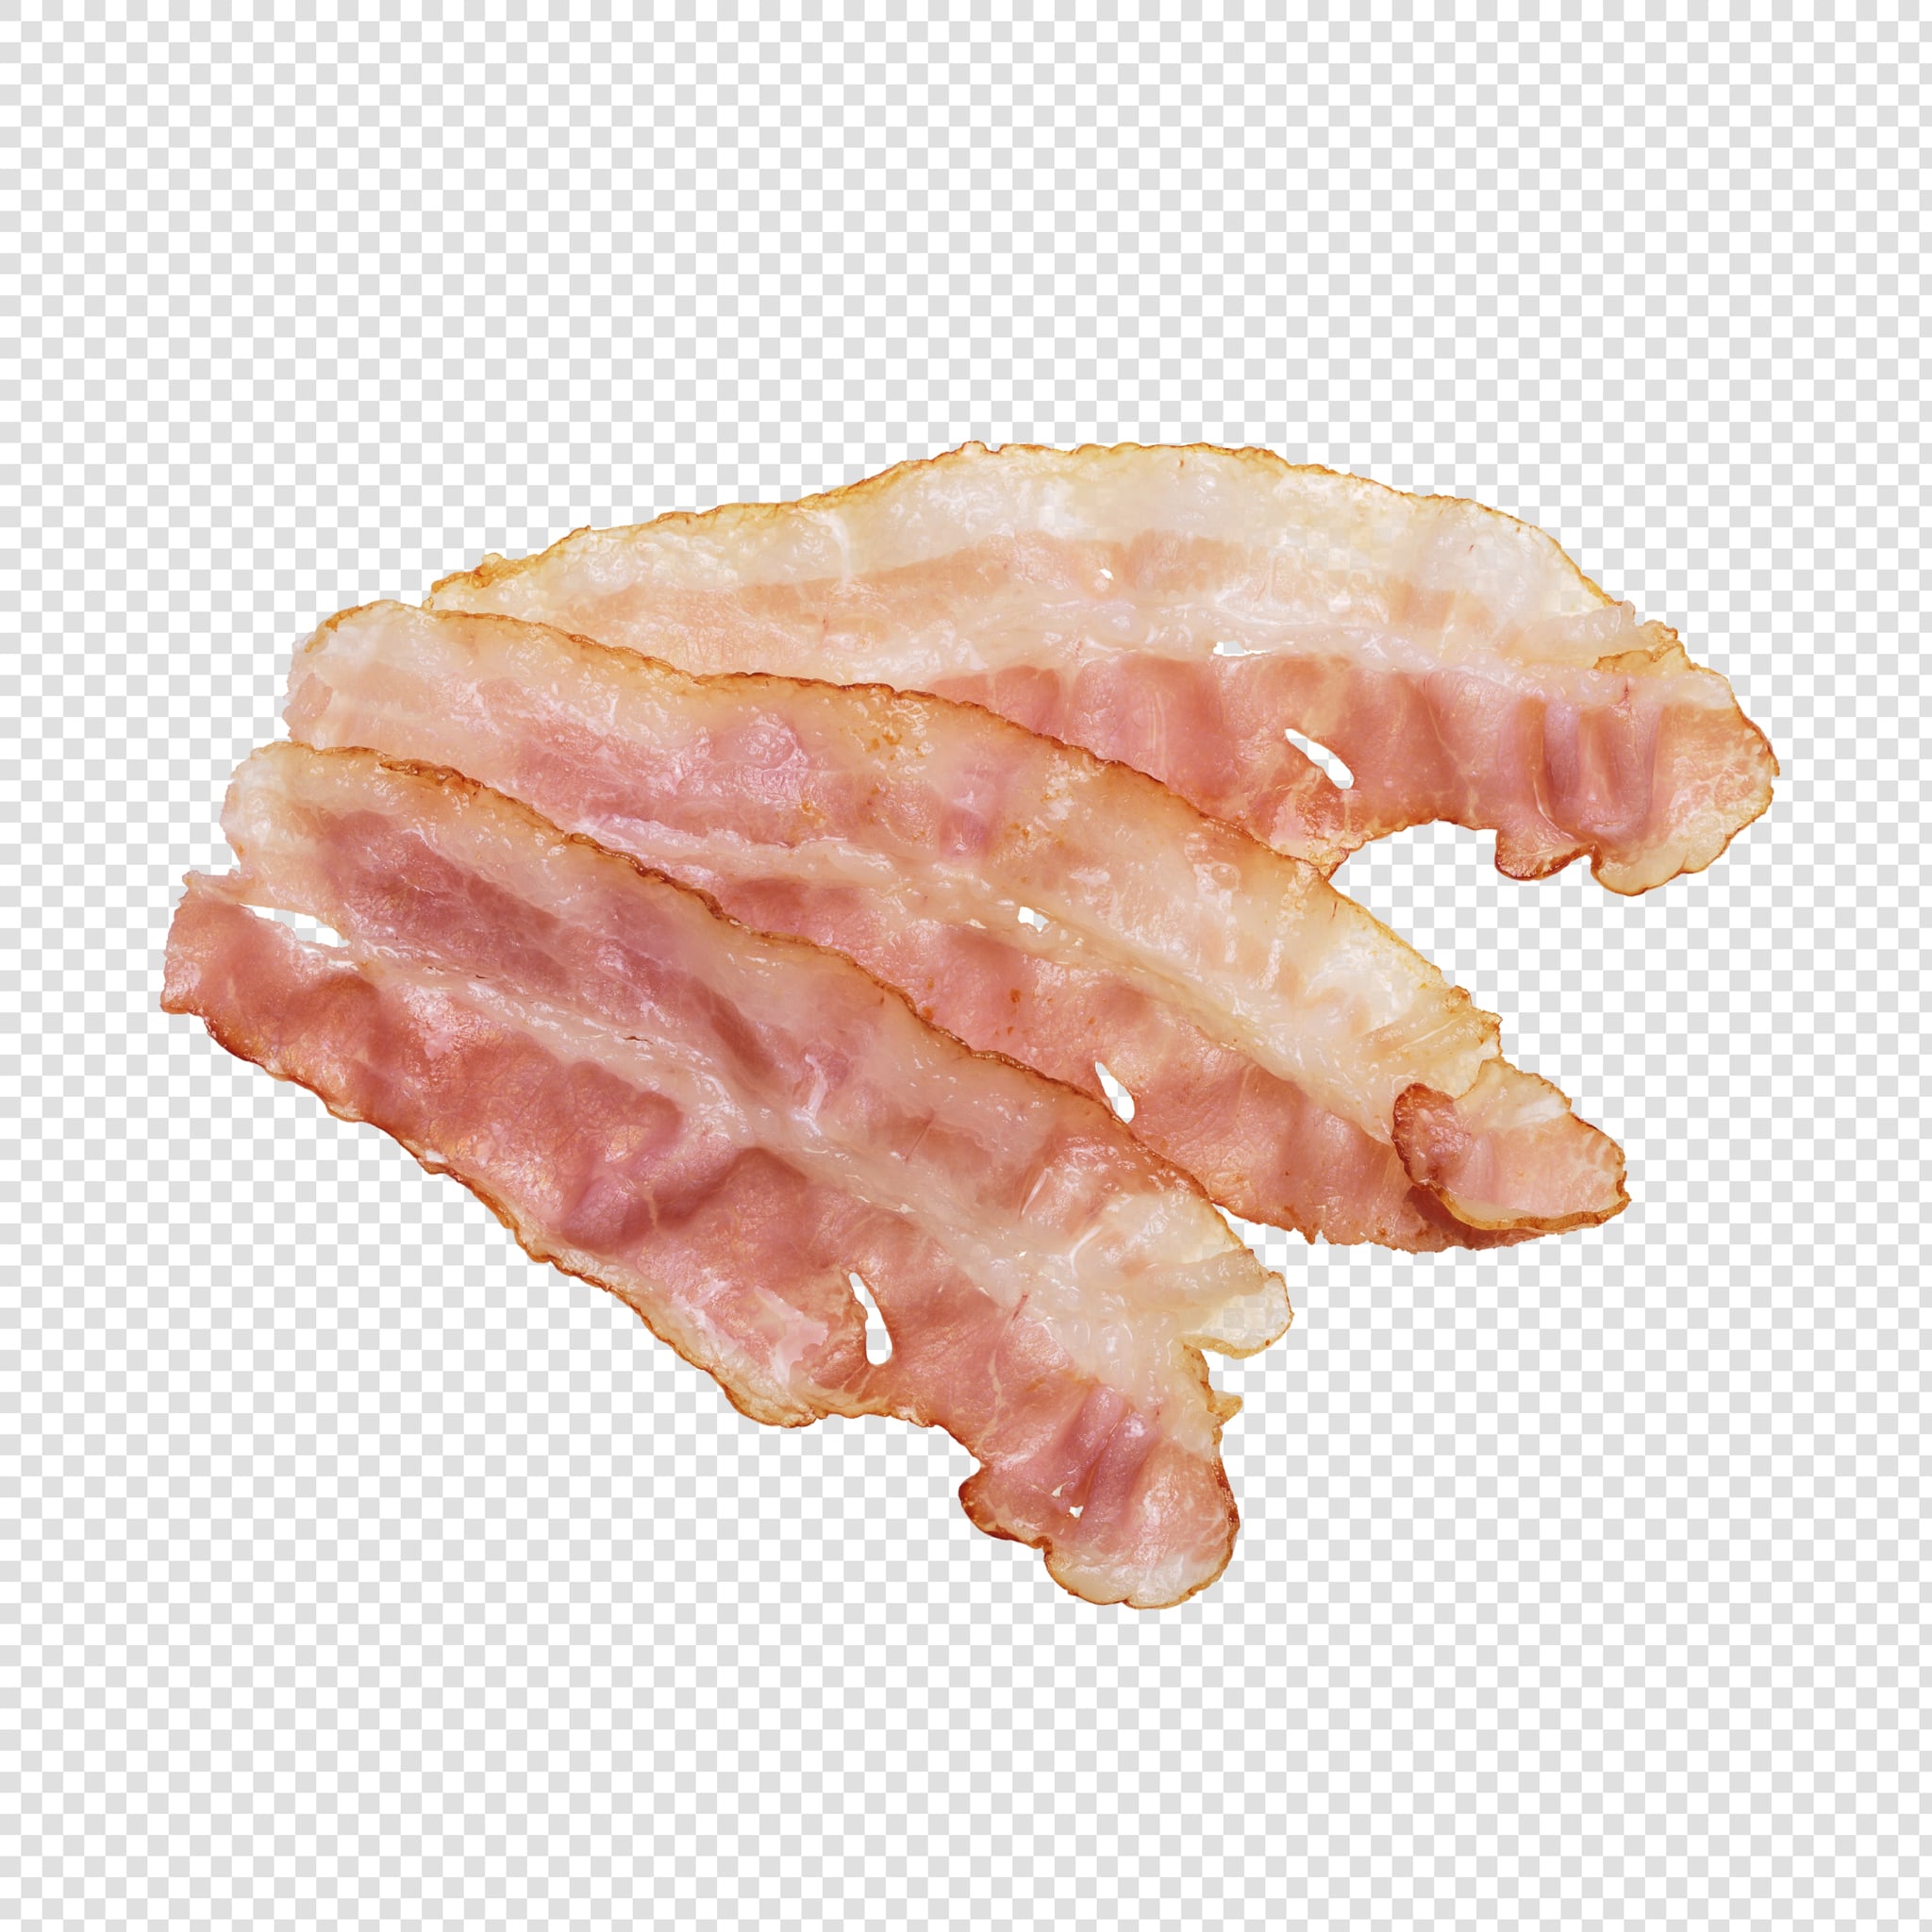 Bacon PSD image with transparent background